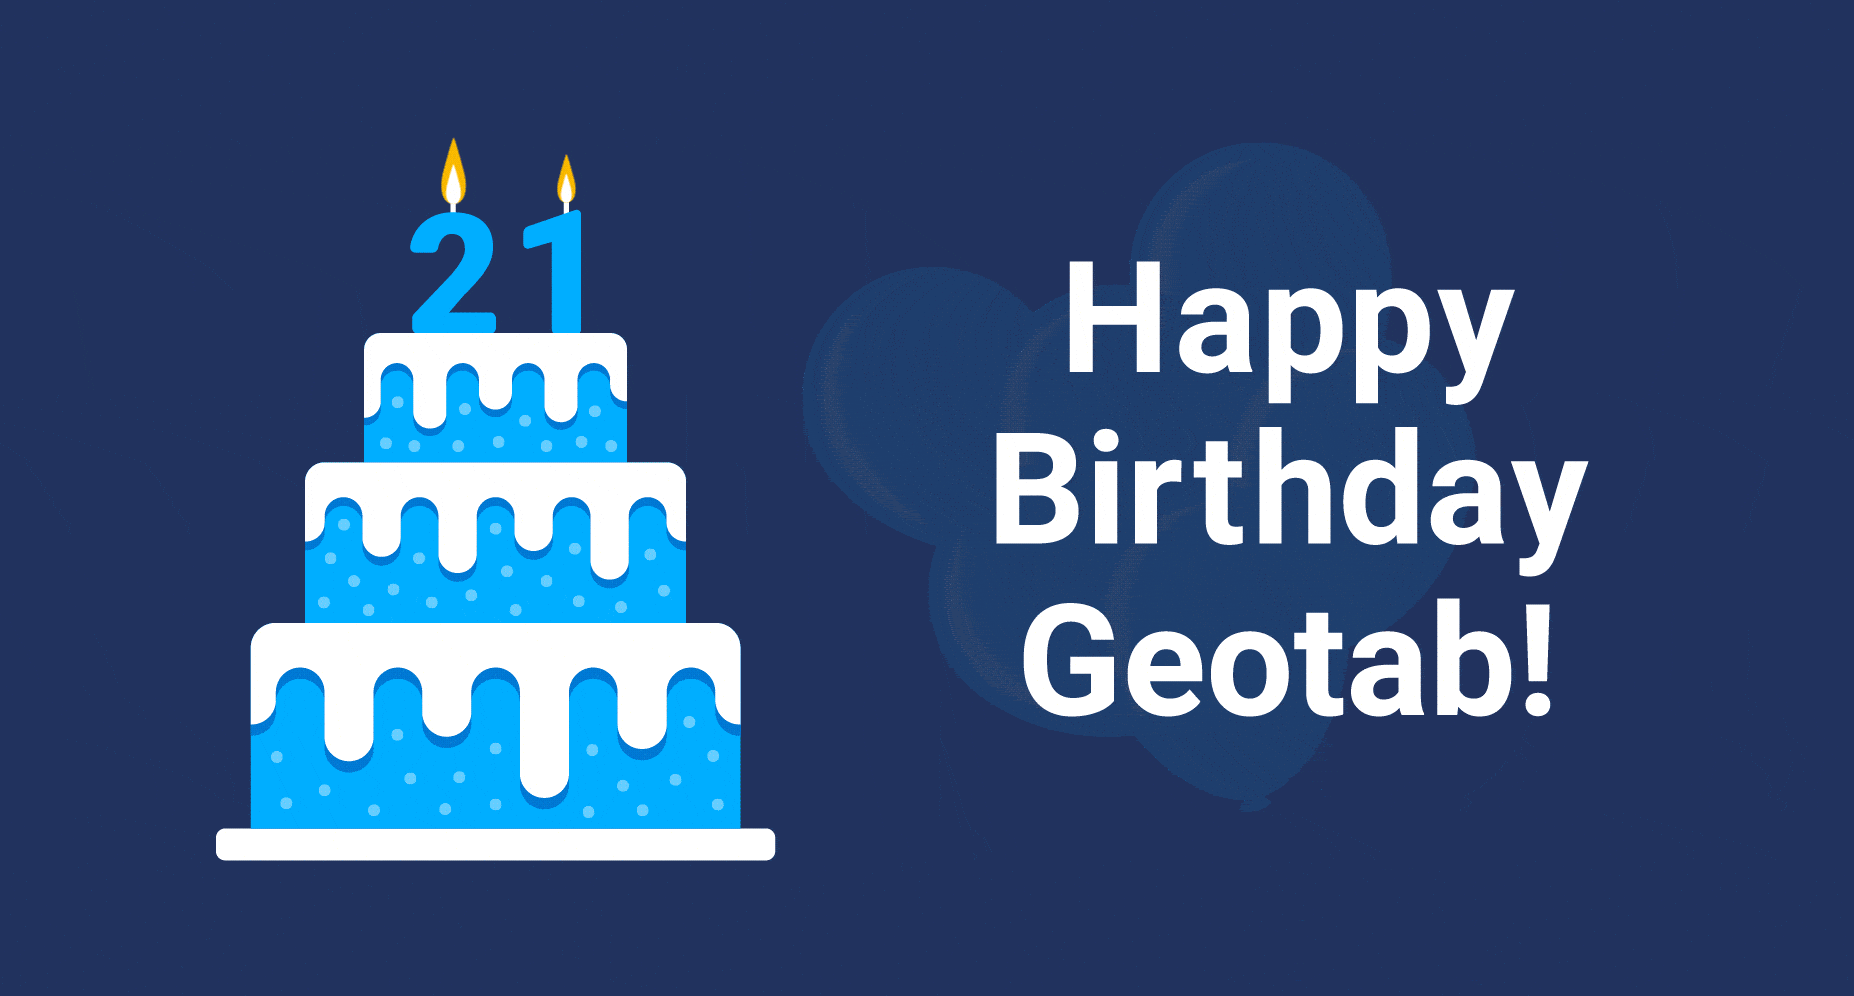 Geotab turns 21 with cake and confetti. 